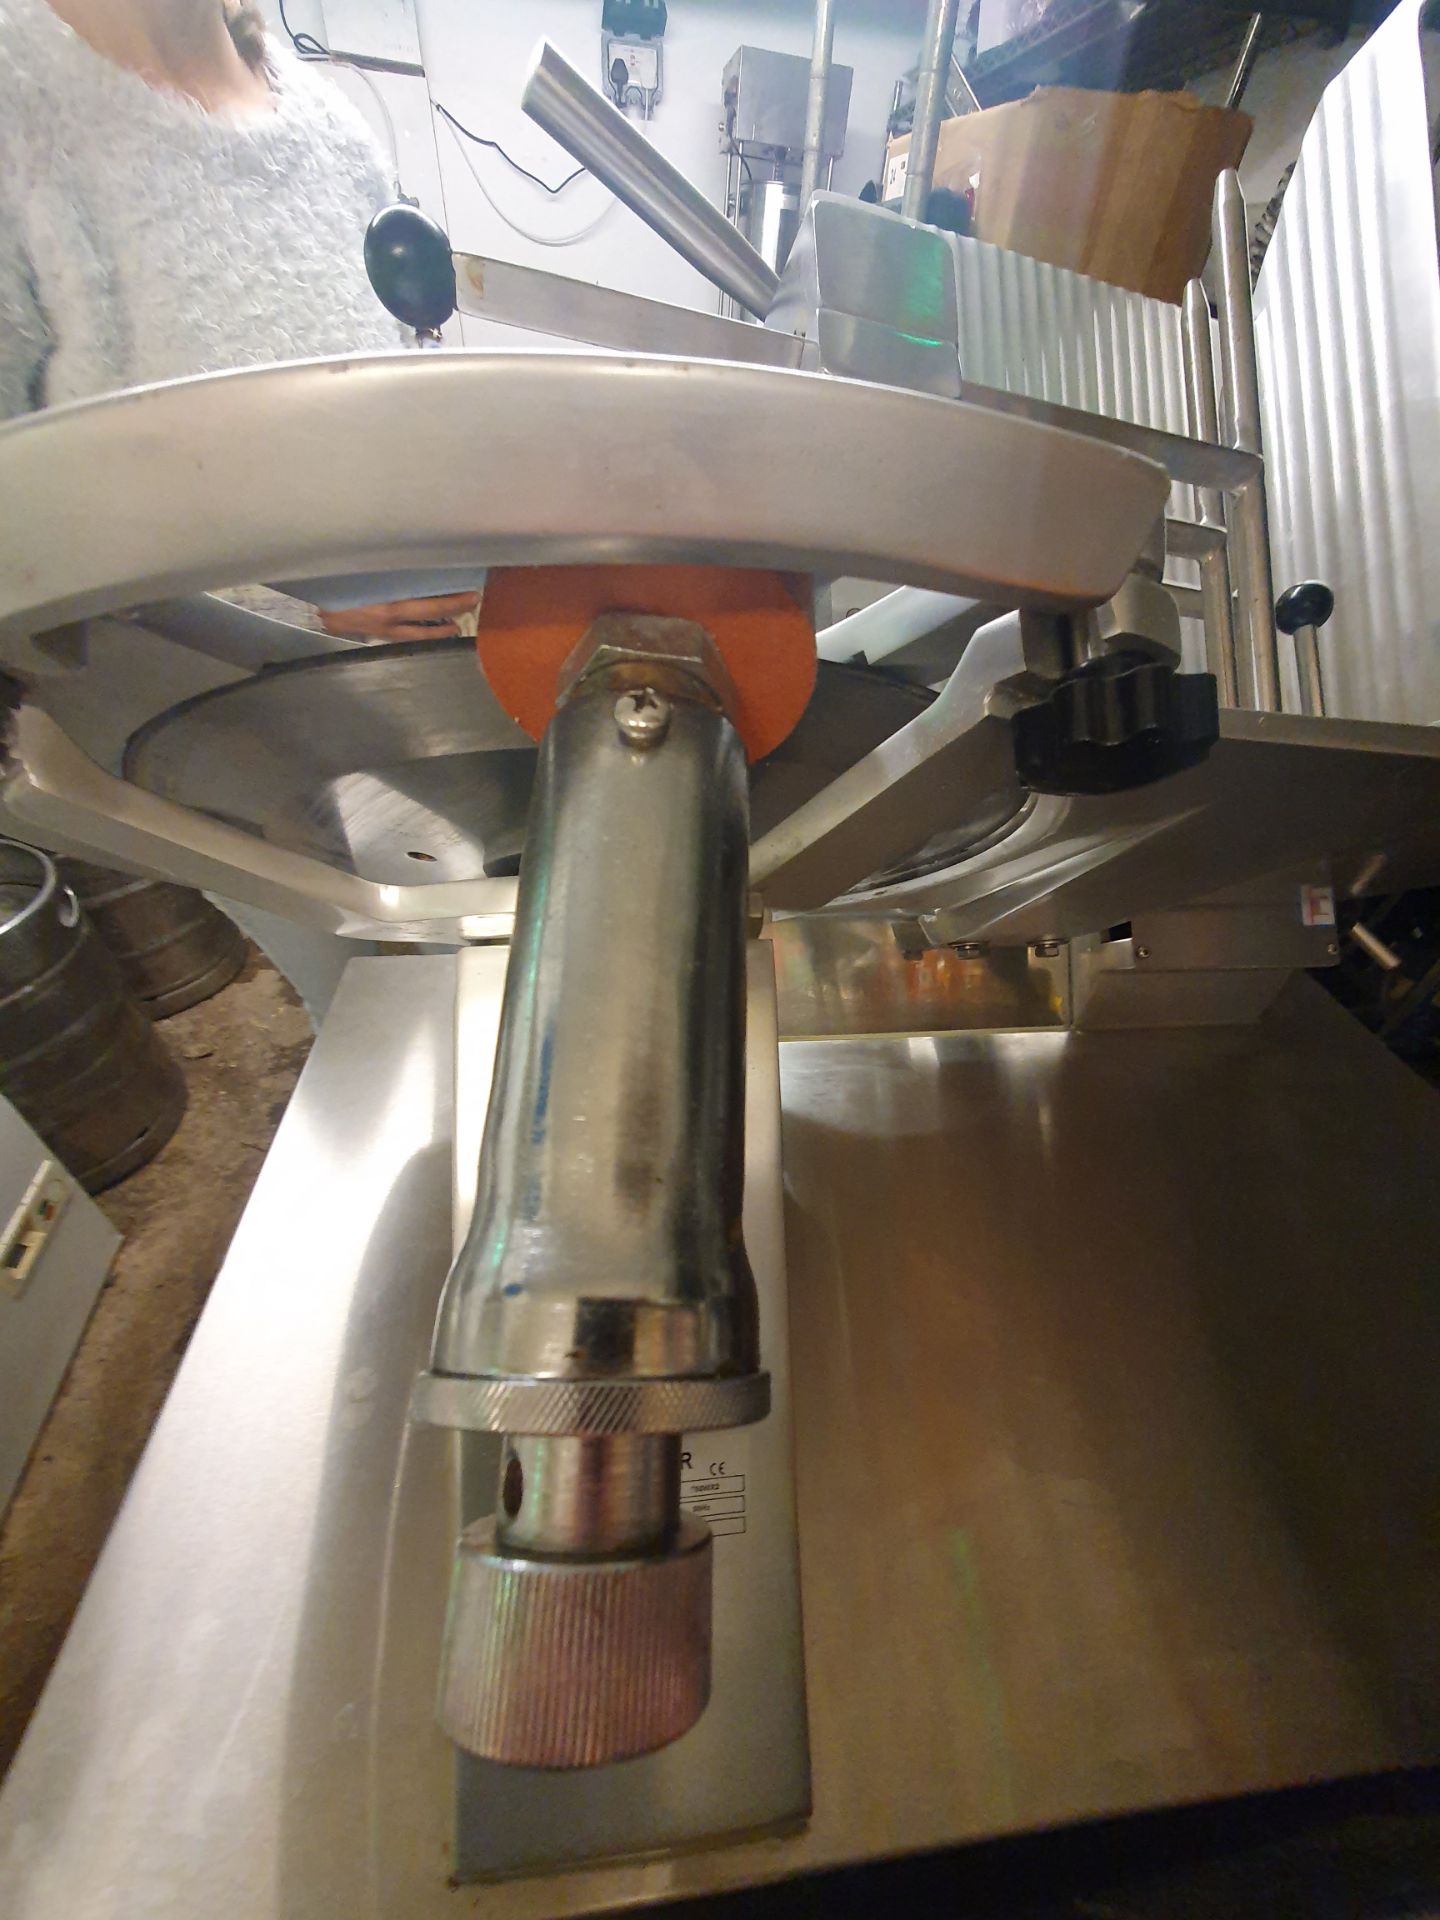 Large Automatic Meat Slicer. - Image 2 of 13